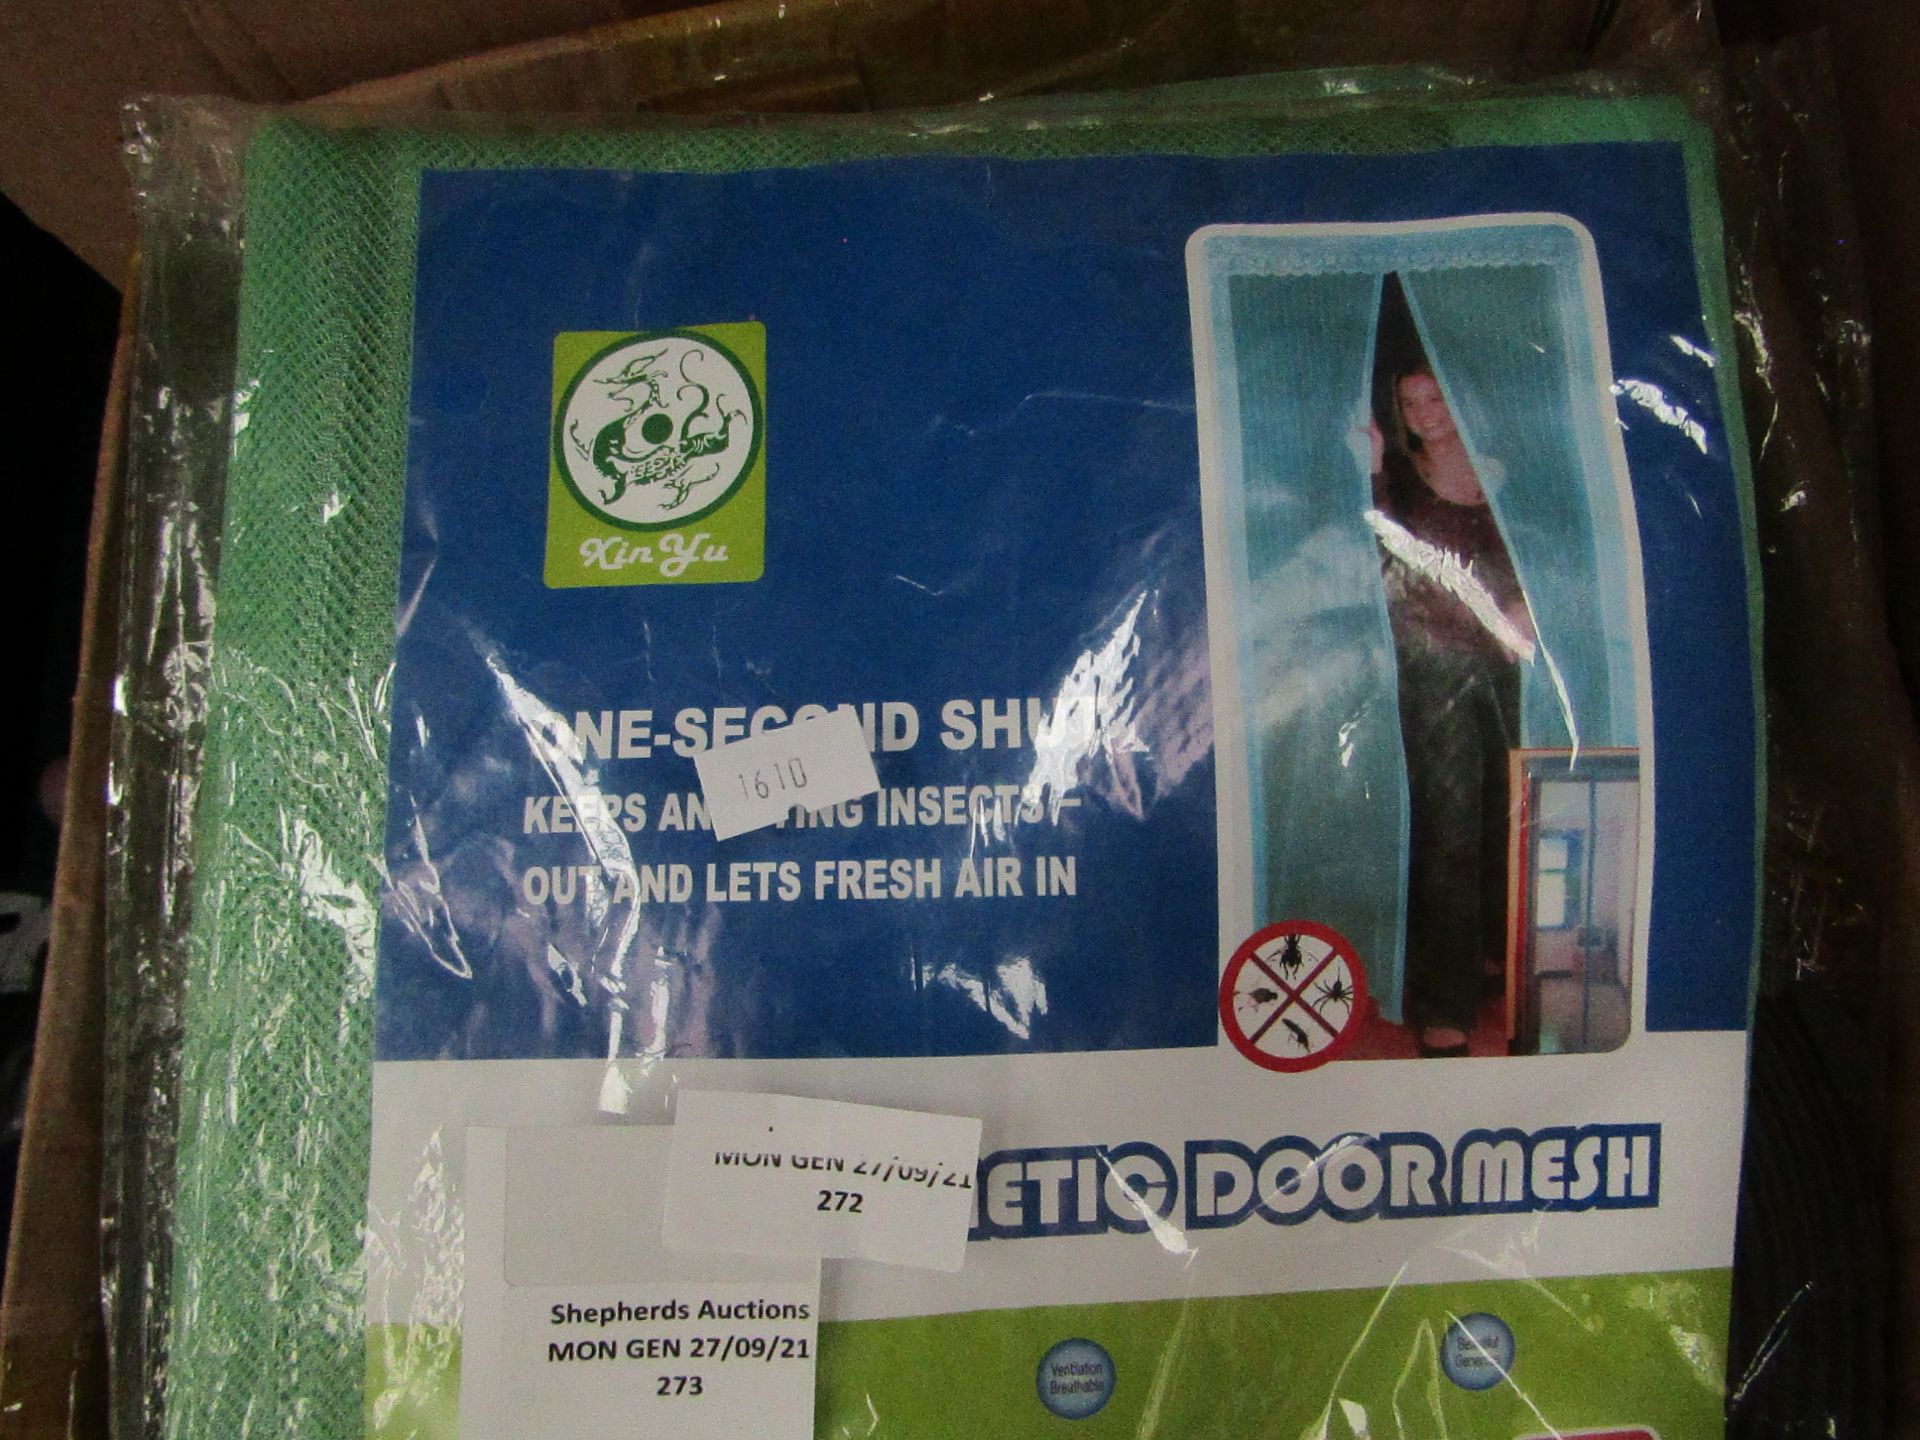 5x Kin Yu - Magnetic Door Mesh (Keeps Out Annoying Insects) - Green - Unused & Packaged.